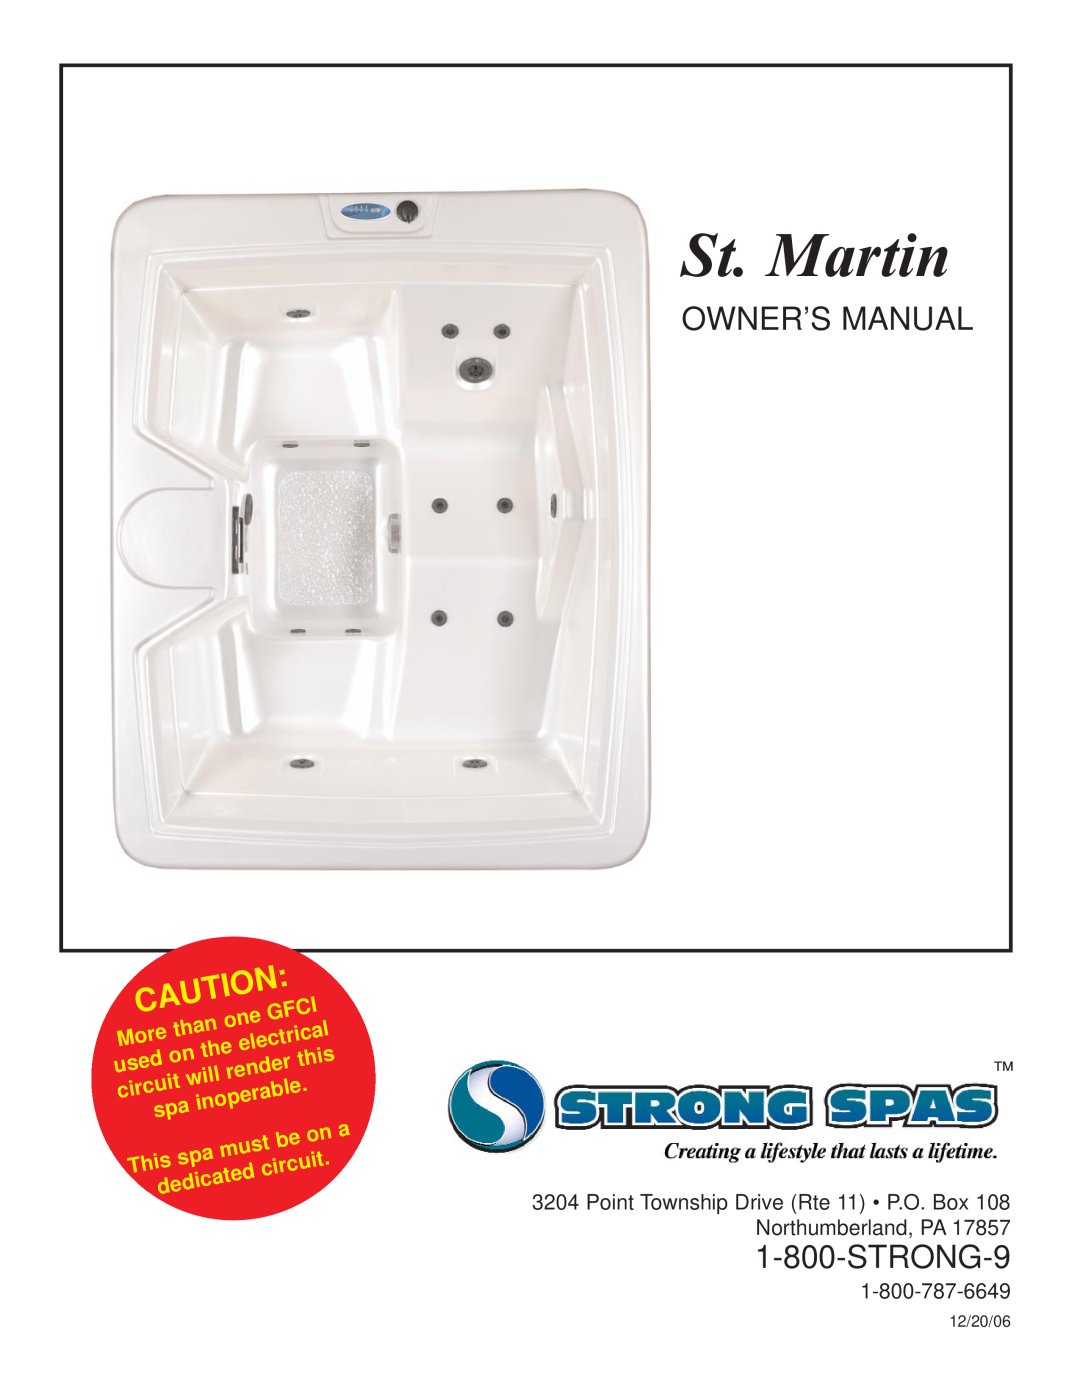 Strong Pools and Spas St. Martin owner manual than, Gfci, More, electrical, used, this, render, will, circuit, inoperable 